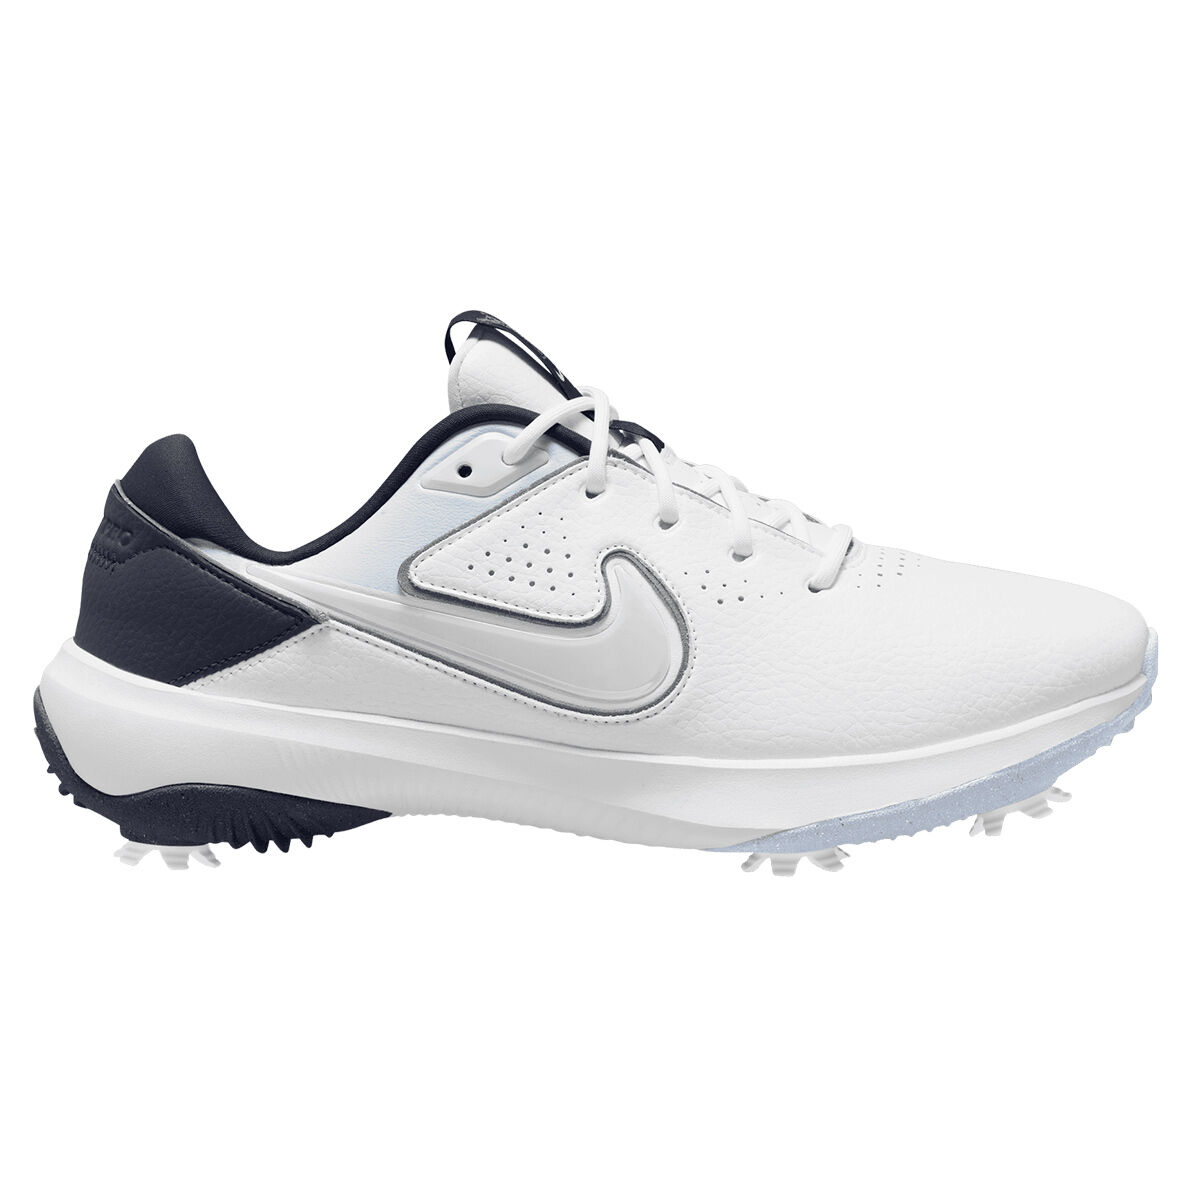 Nike Men’s Victory Pro 3 Waterproof Spiked Golf Shoes, Mens, White/football grey/obsidian, 11 | American Golf